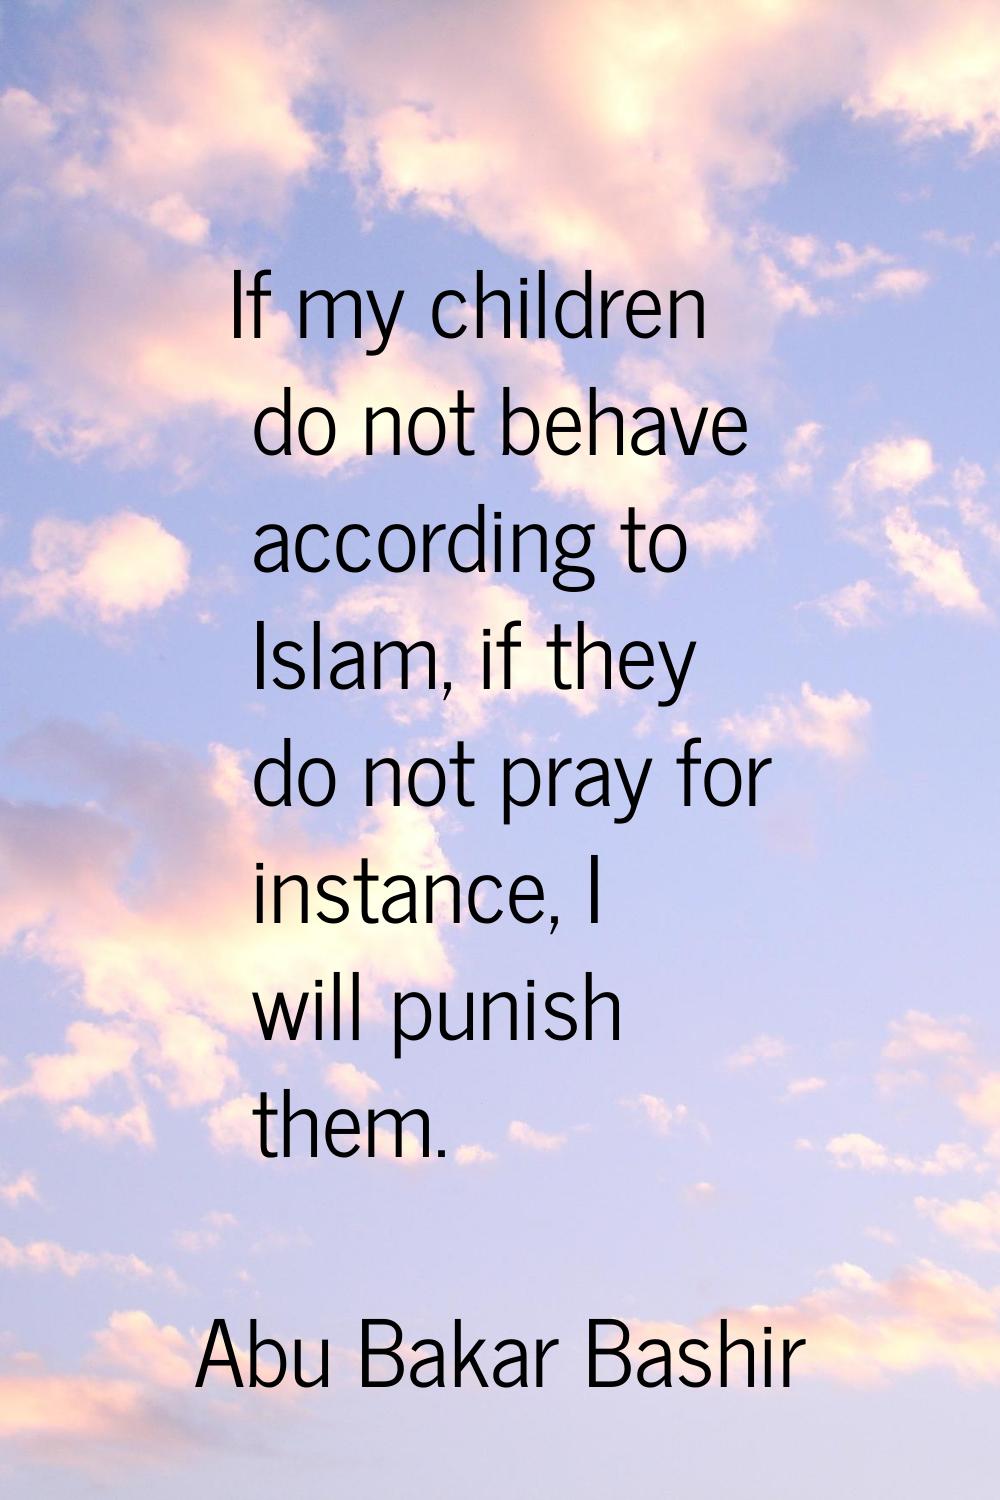 If my children do not behave according to Islam, if they do not pray for instance, I will punish th